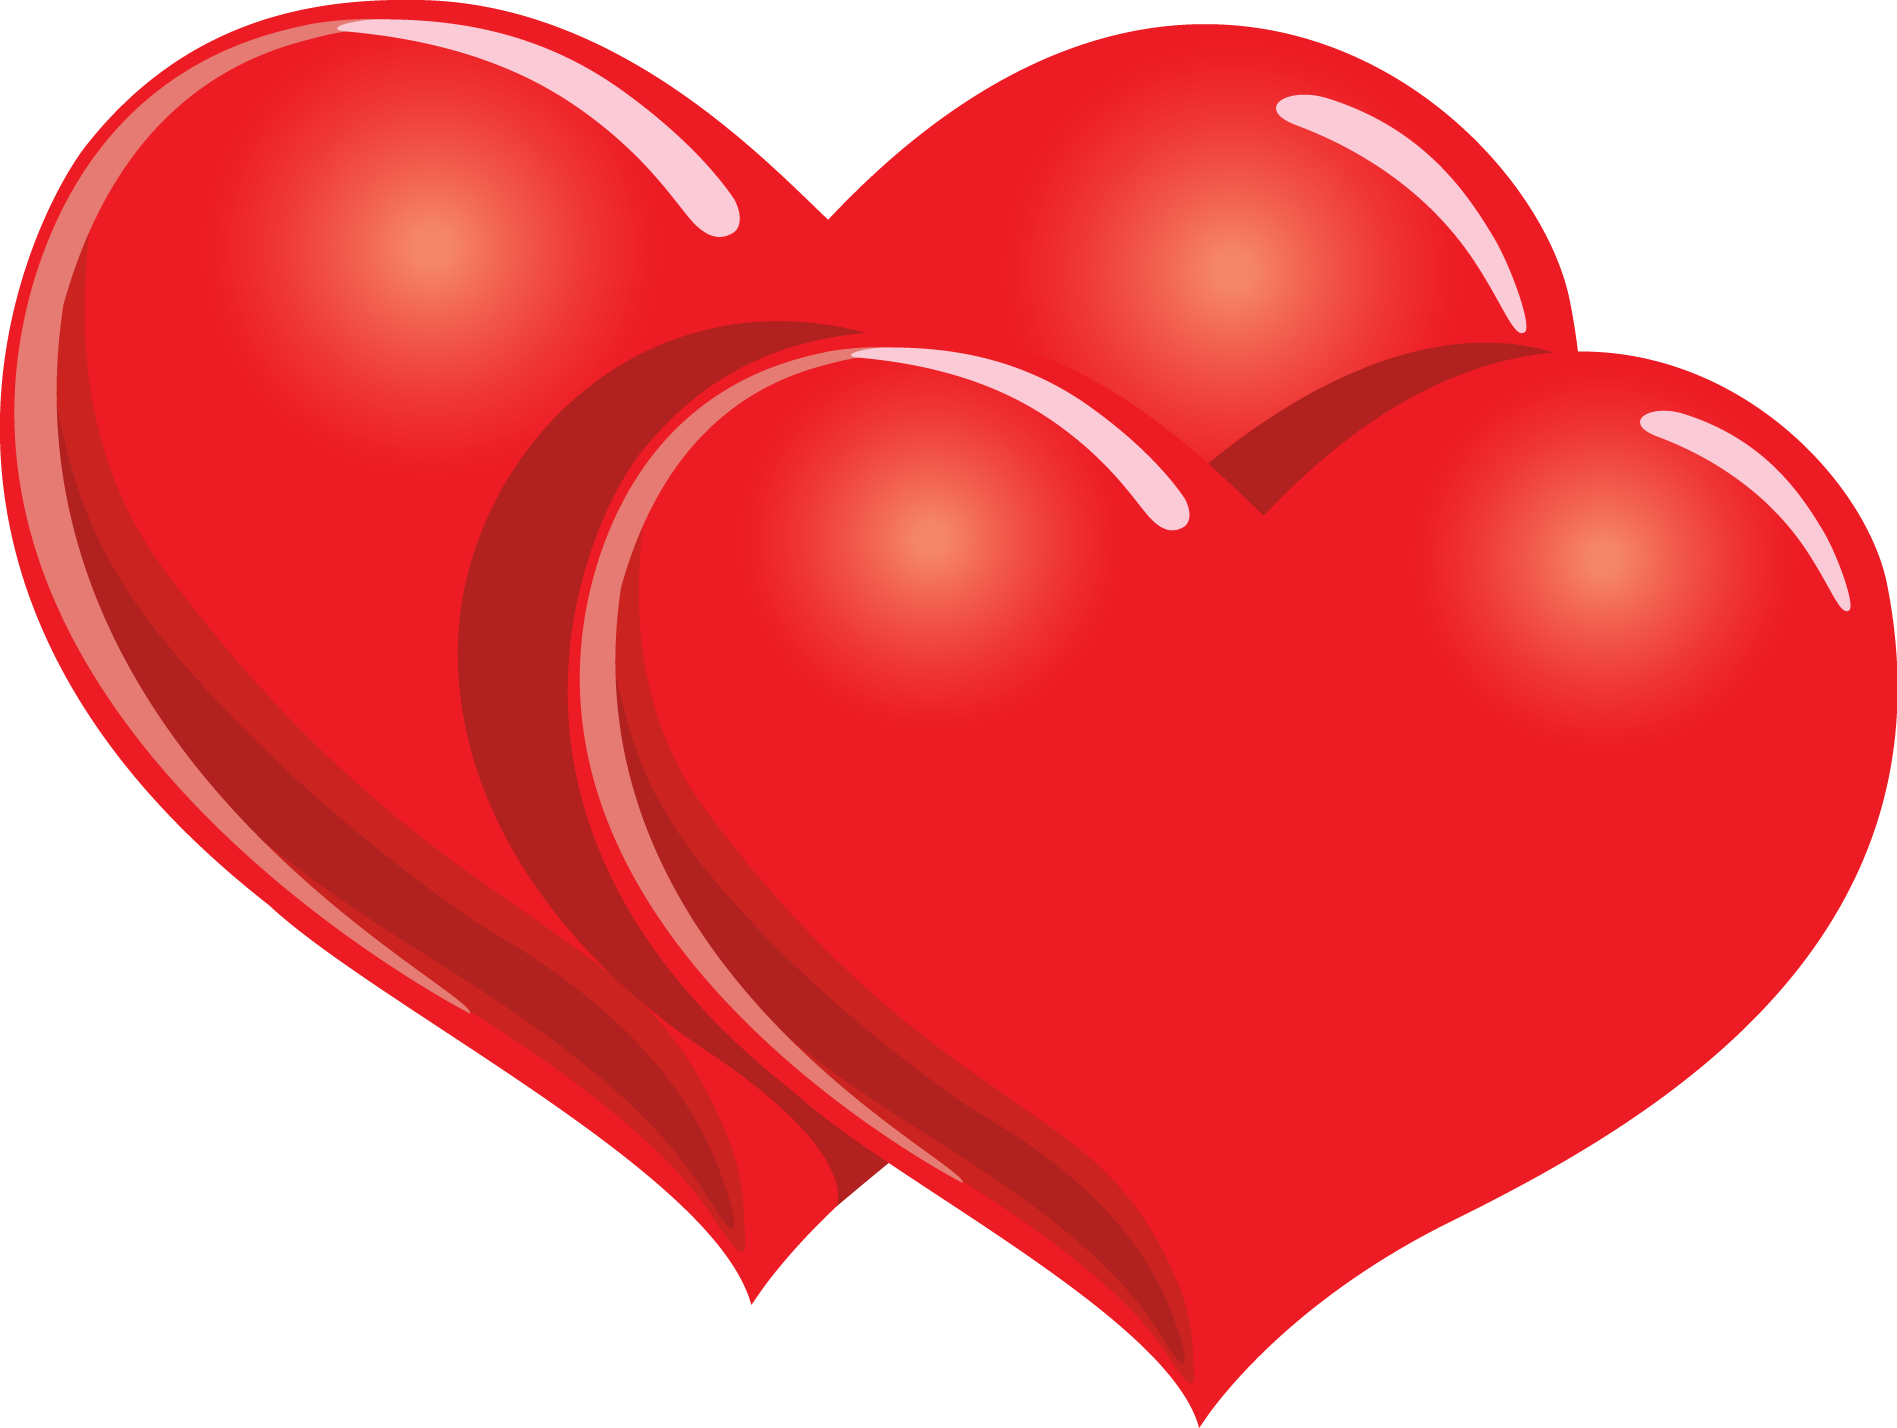 Two heart clipart red - ClipartFox